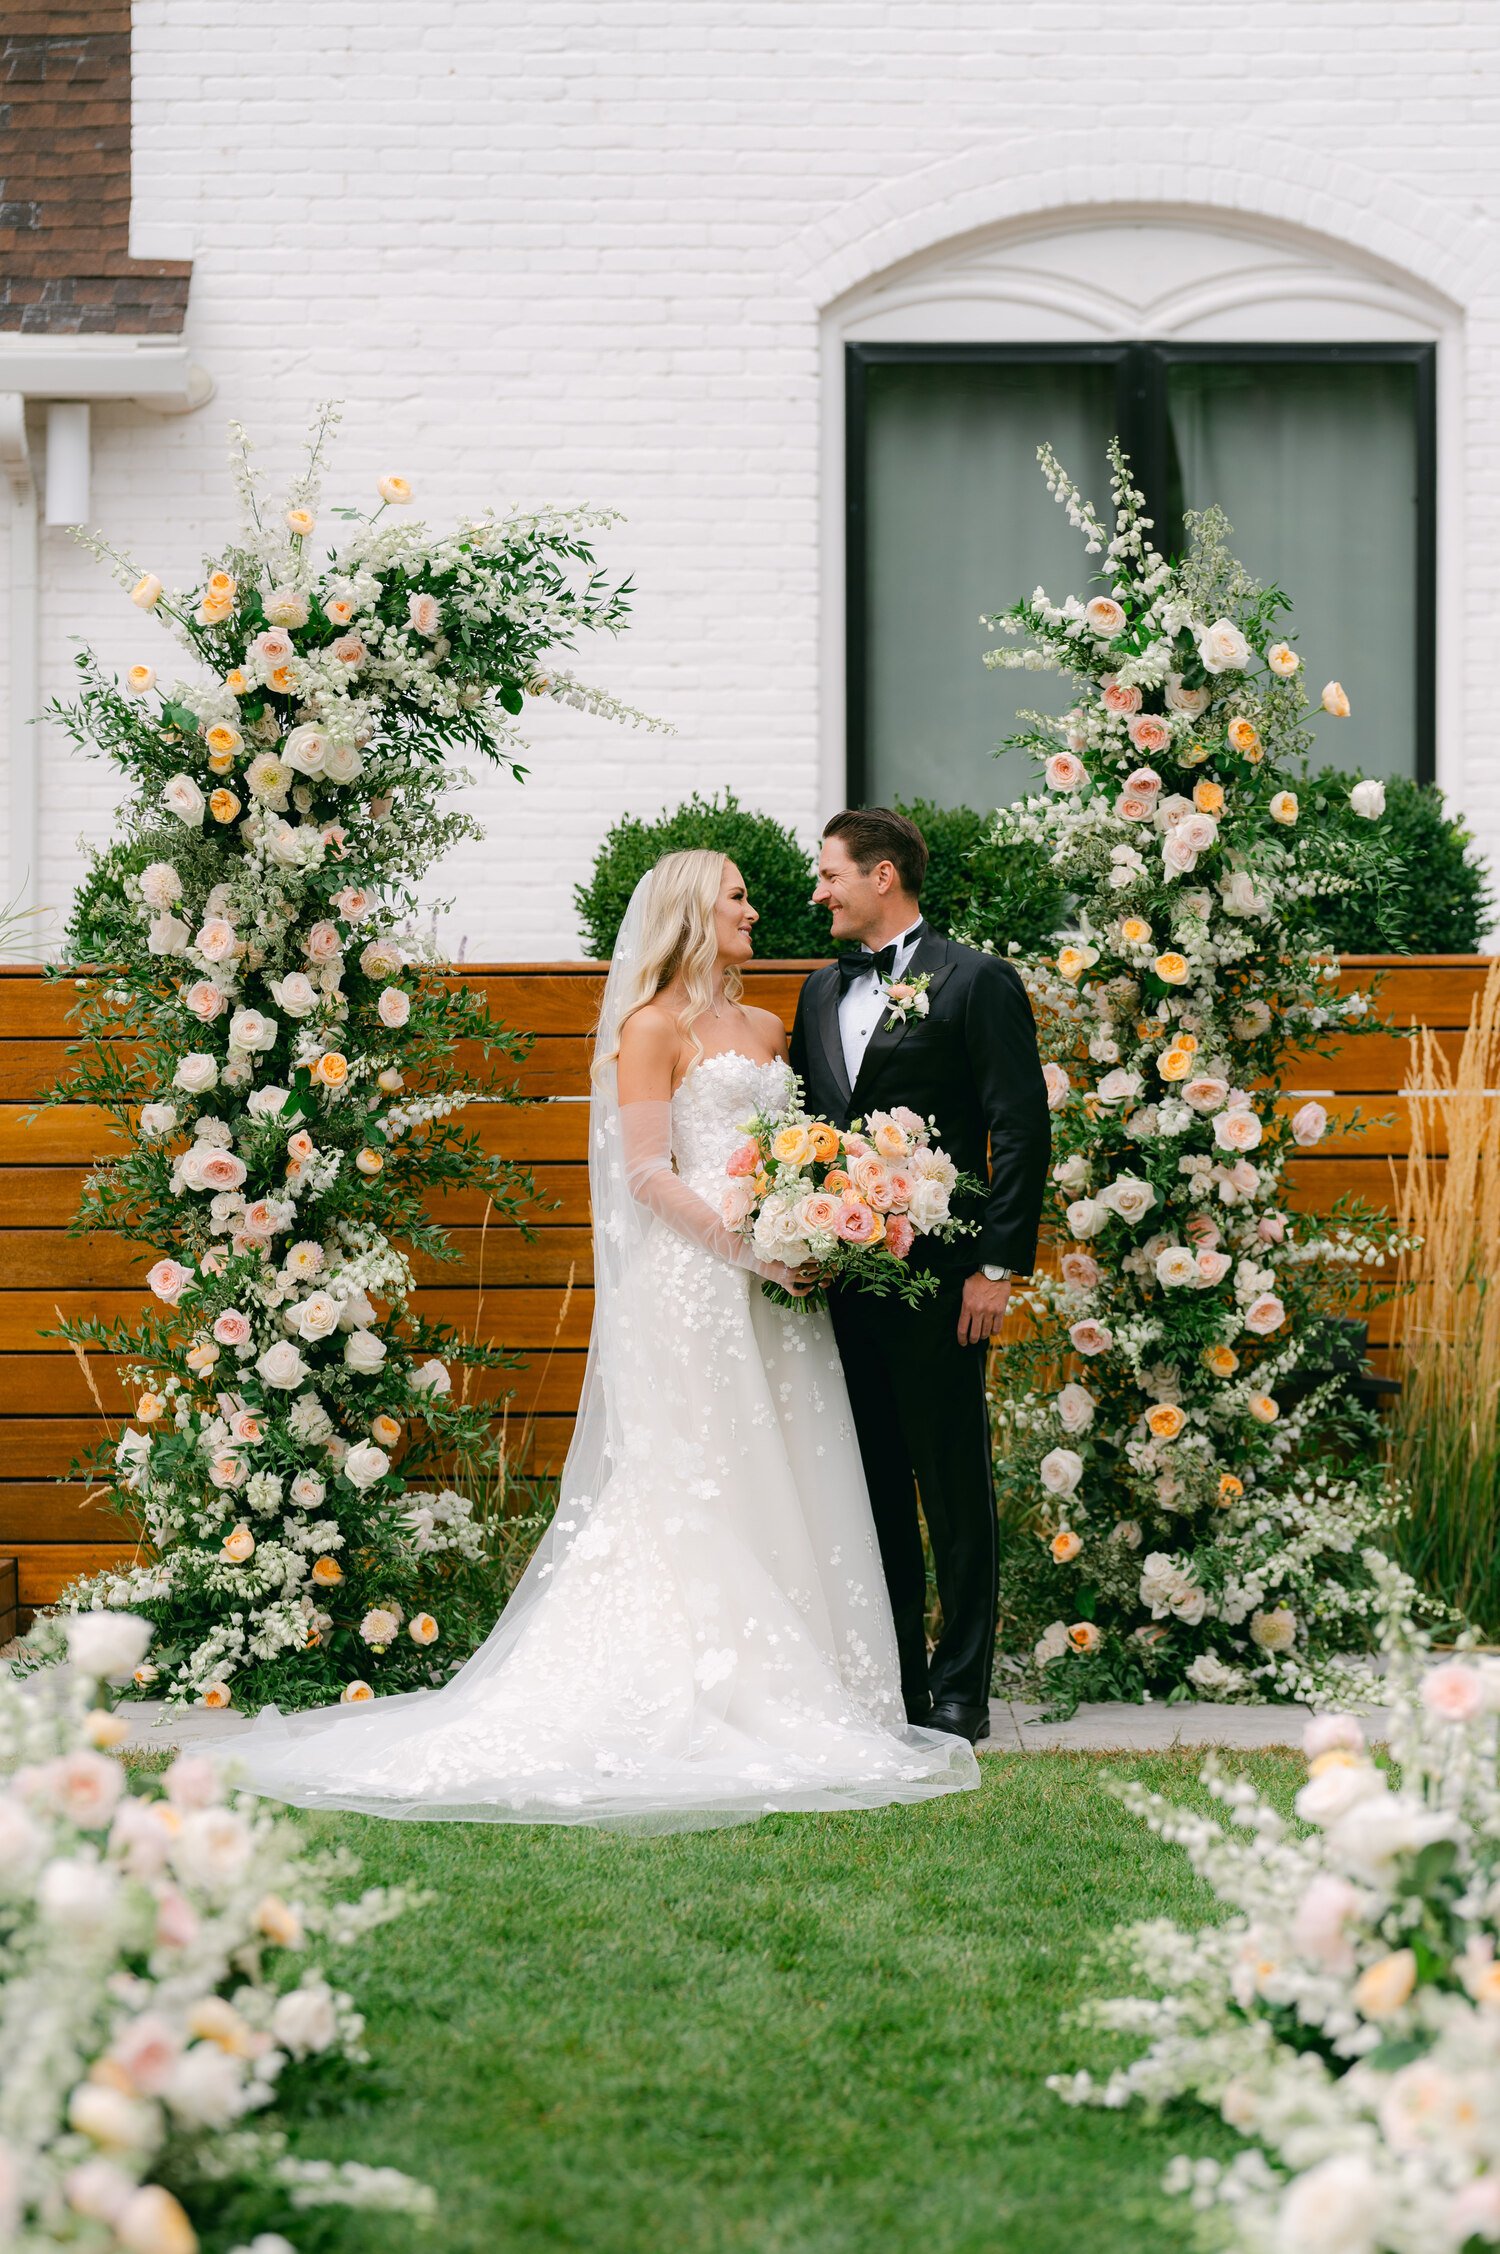 Elm Estate Wedding photos, photo of the bride in her elegant wedding dress and the groom in classic wedding suit surrounded by blooming flowers 